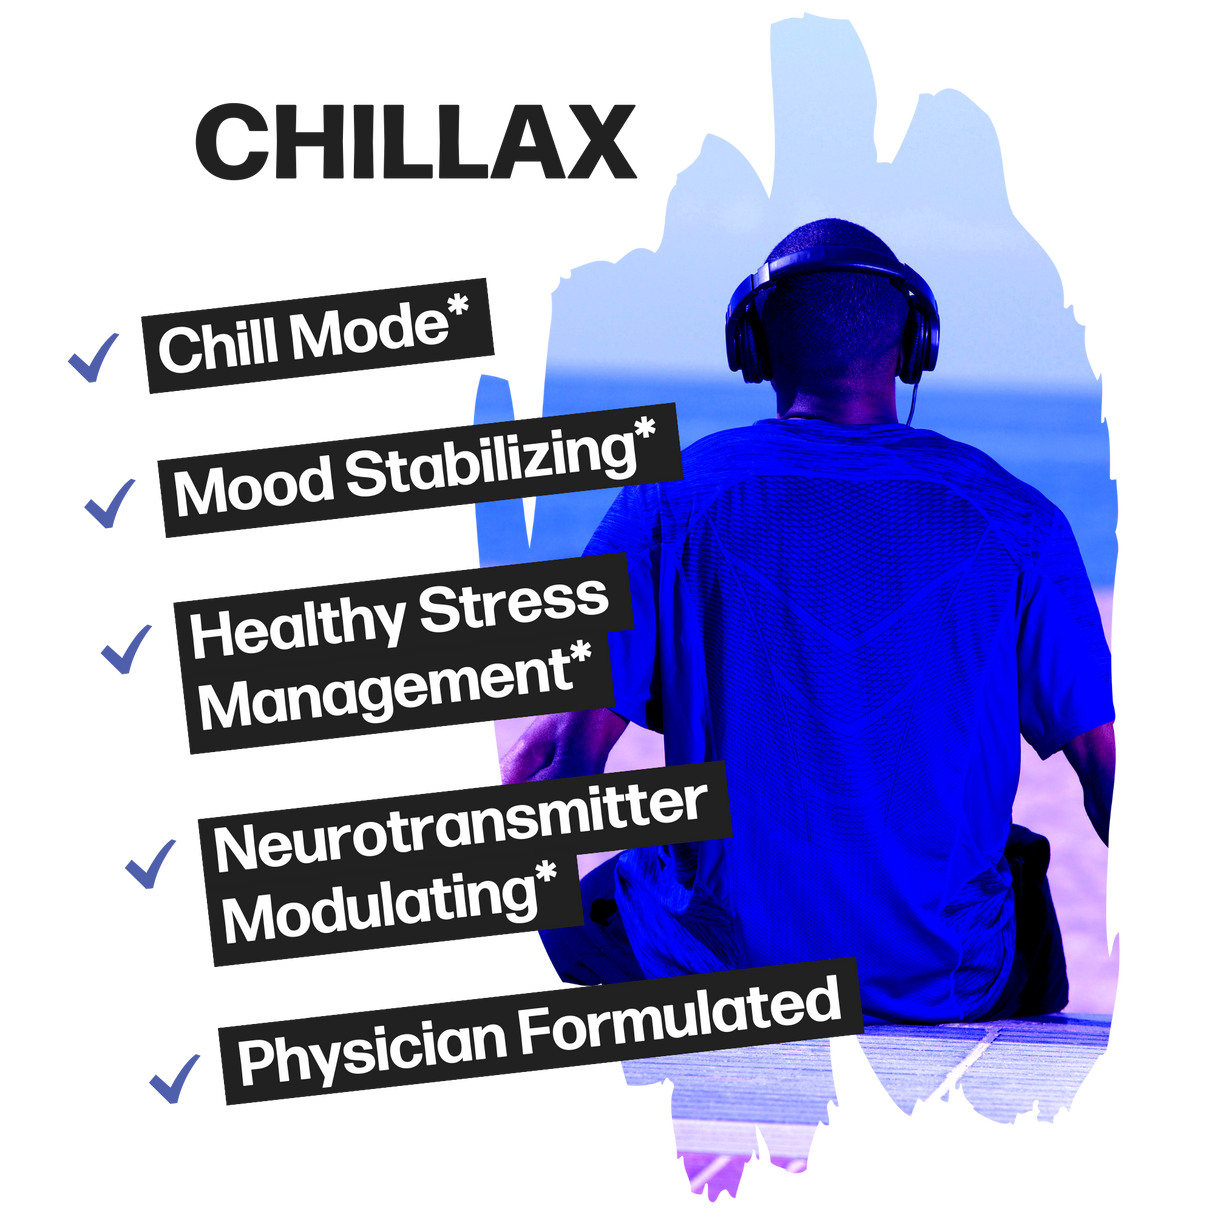 Life Happns Chillax Stress Support Supplement Benefits Listed as Chill Mode, Mood Stabilizing, Healthy Stress Management, Neurotransmitter Modulating, and Physician Formulated